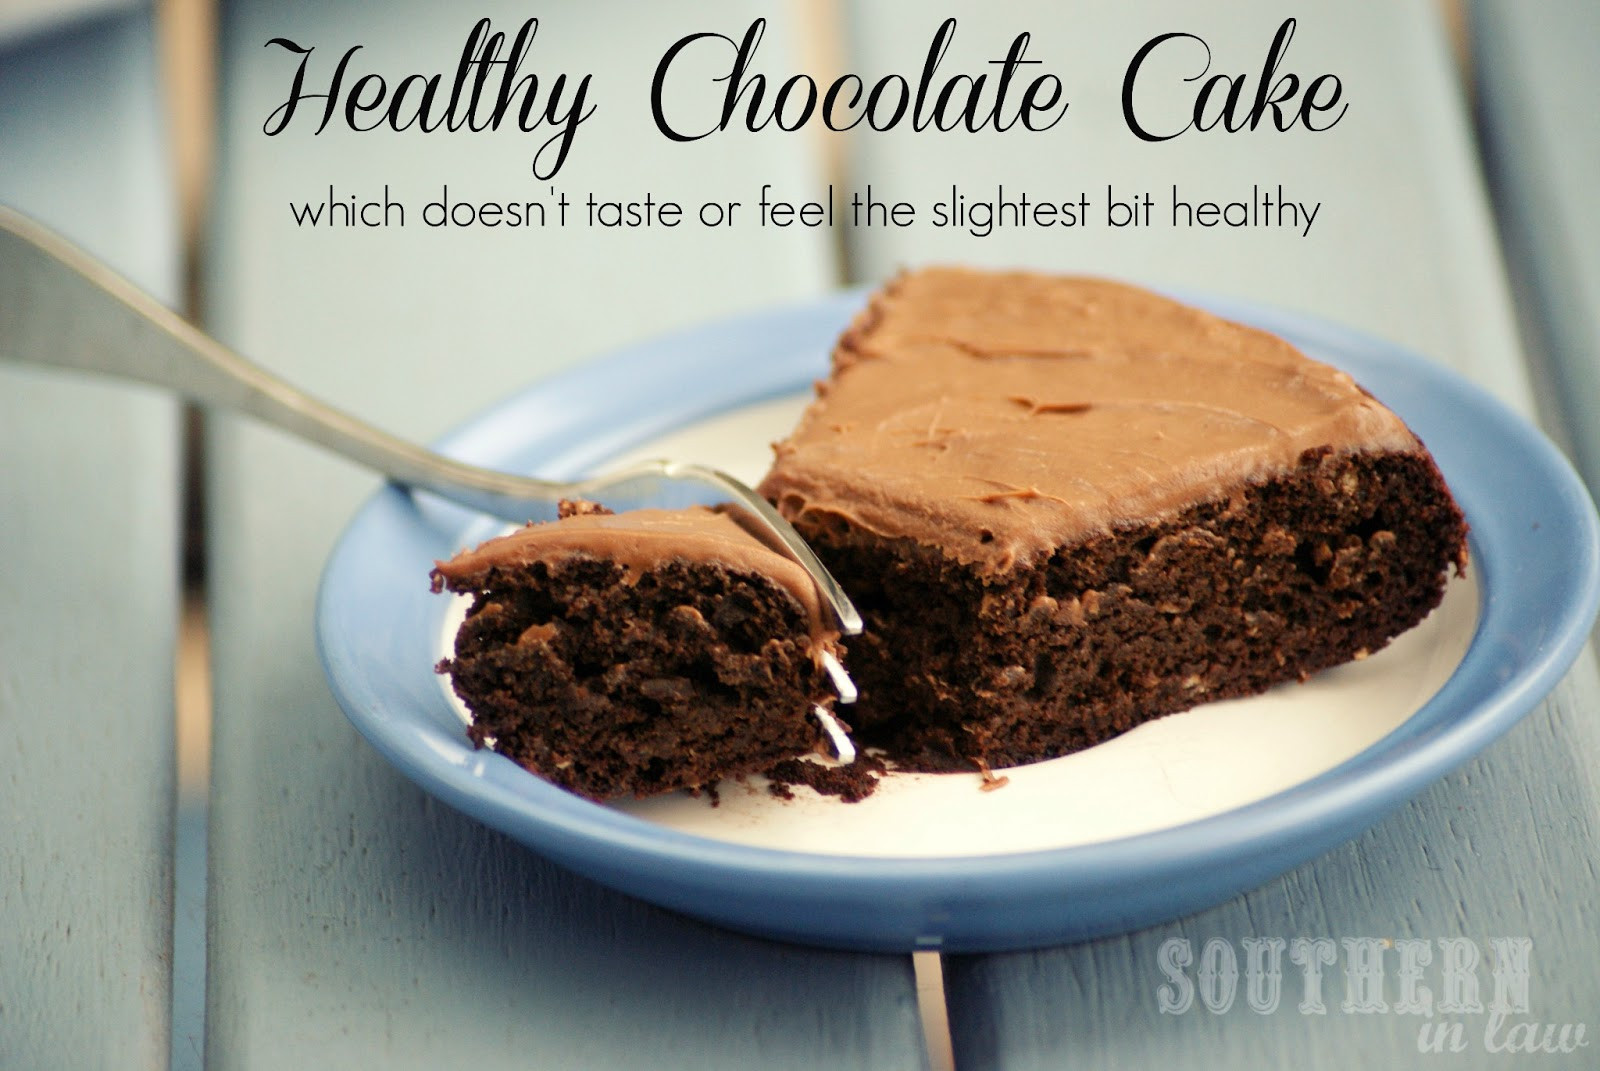 Healthy Chocolate Cake Recipe top 20 southern In Law Recipe Healthy Chocolate Cake Vegan too